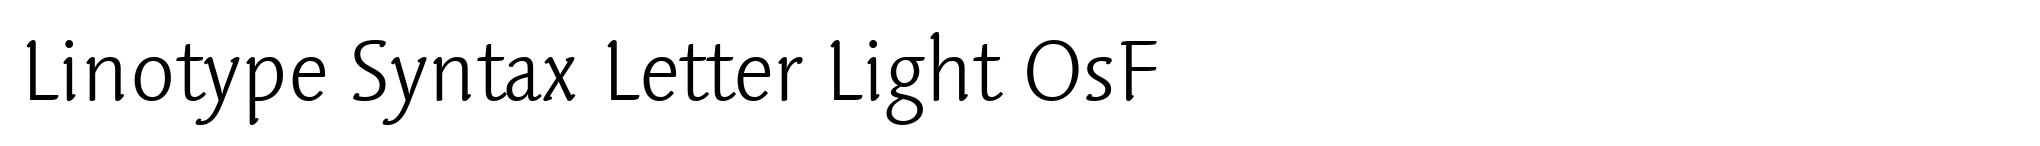 Linotype Syntax Letter Light OsF image